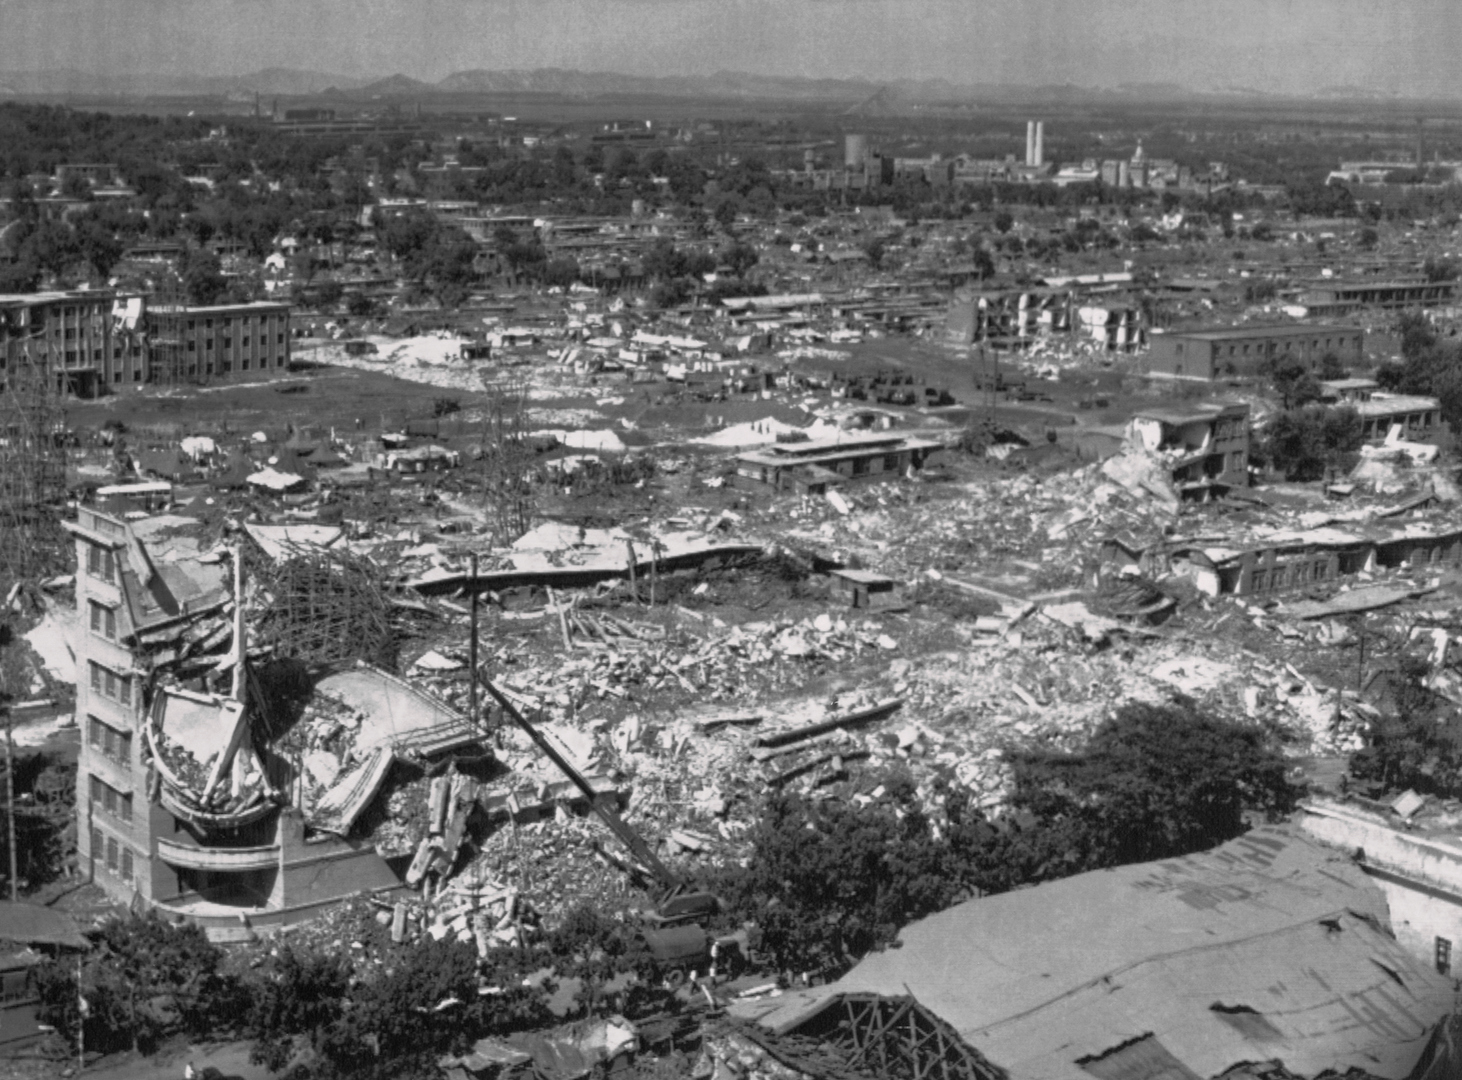 View of the damage in Tangshan, China after the magnitude 7.8 earthquake in 1976.